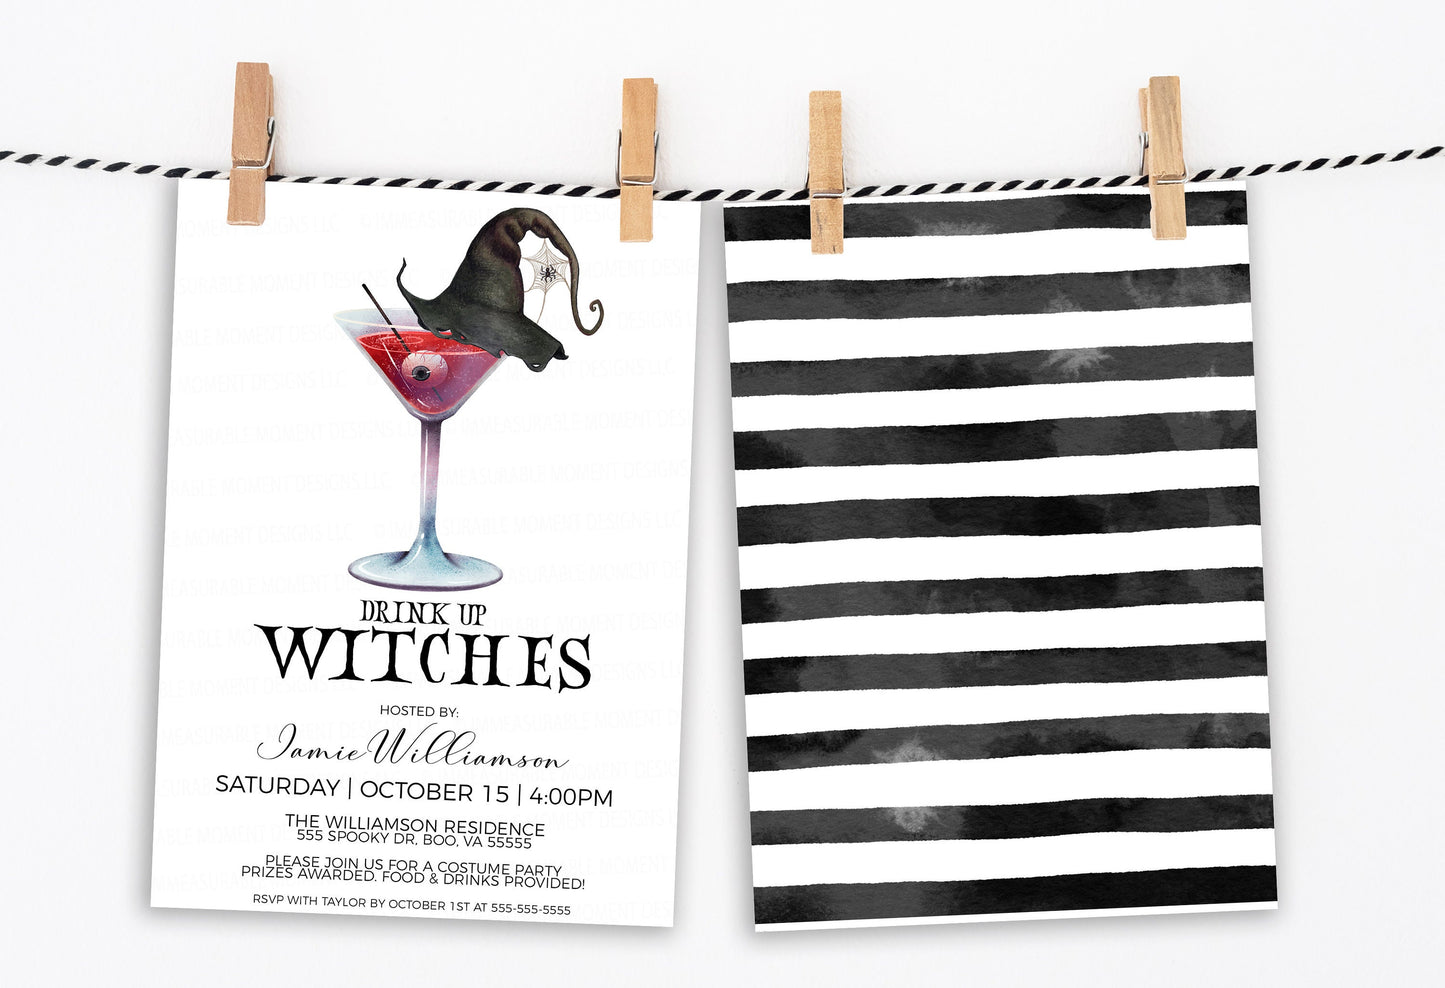 Halloween Party Invitation, Drink Up Witches, Ladies Night Bridal Bachelorette Minimalist Watercolor Invite, Costume Cocktails Printable